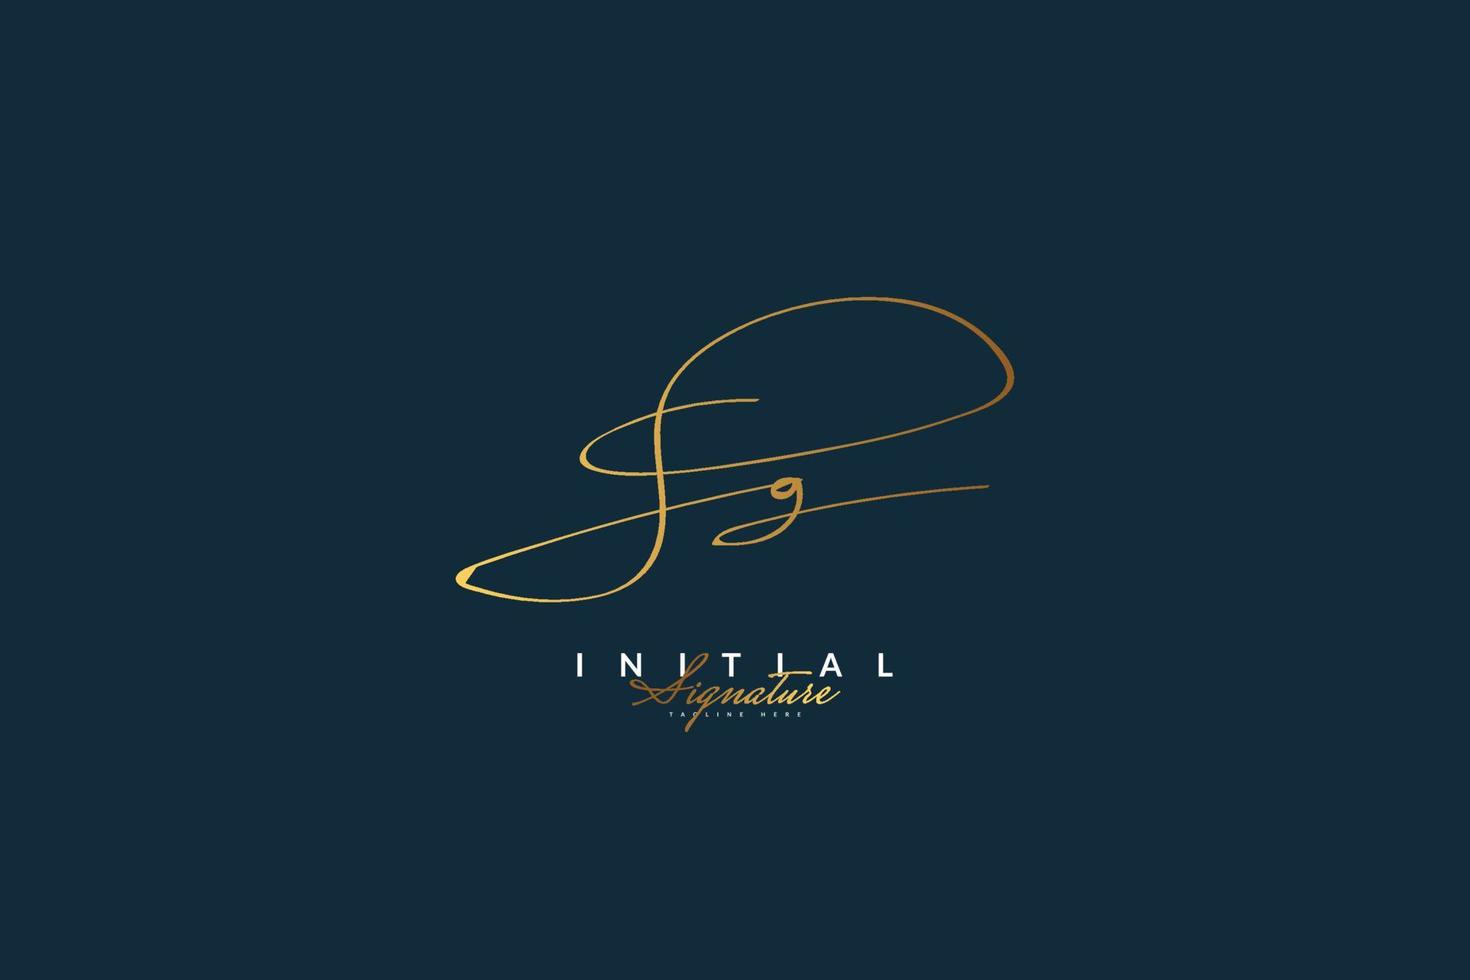 SG Initial Signature Logo or Symbol with Handwriting Style for Wedding, Fashion, Jewelry, Boutique, Botanical, Floral and Business Identity vector